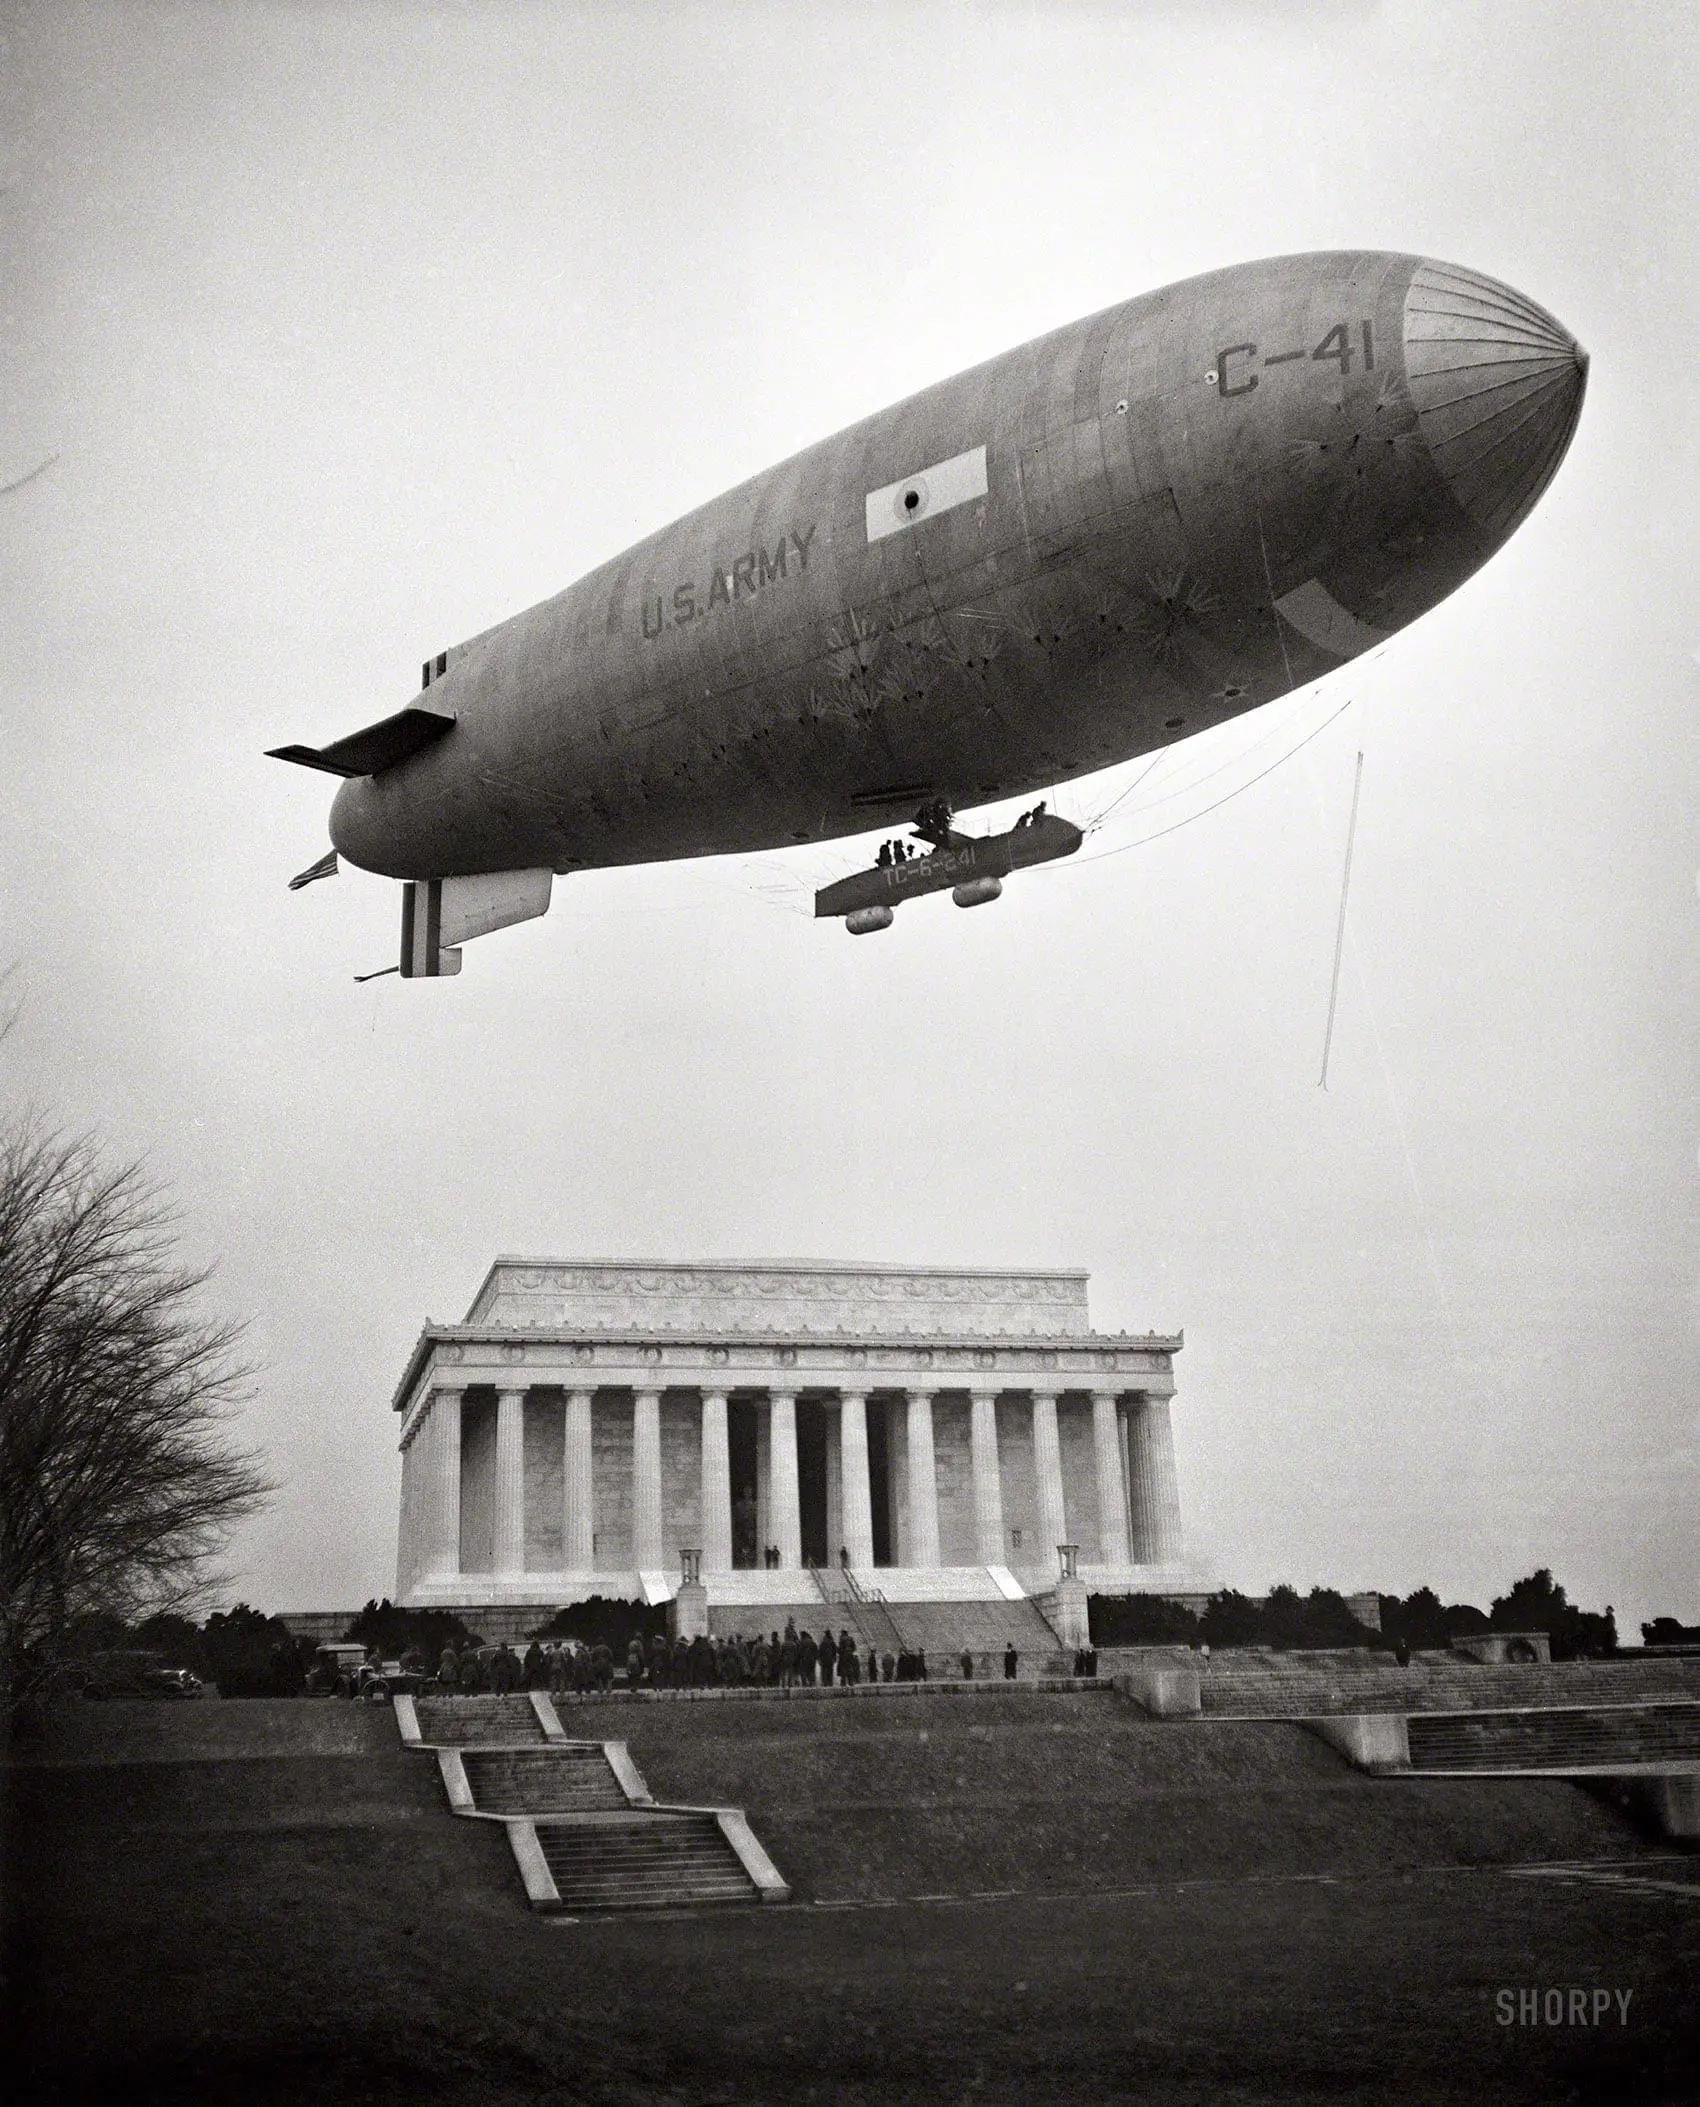 February 1930. Washington, D.C. "Army Airship C-41 lands on Mall and airmen, led by Brigadier General William J. Flood of the 19th Airship Company, place wreath at Lincoln Memorial, honoring Lincoln's Birthday."